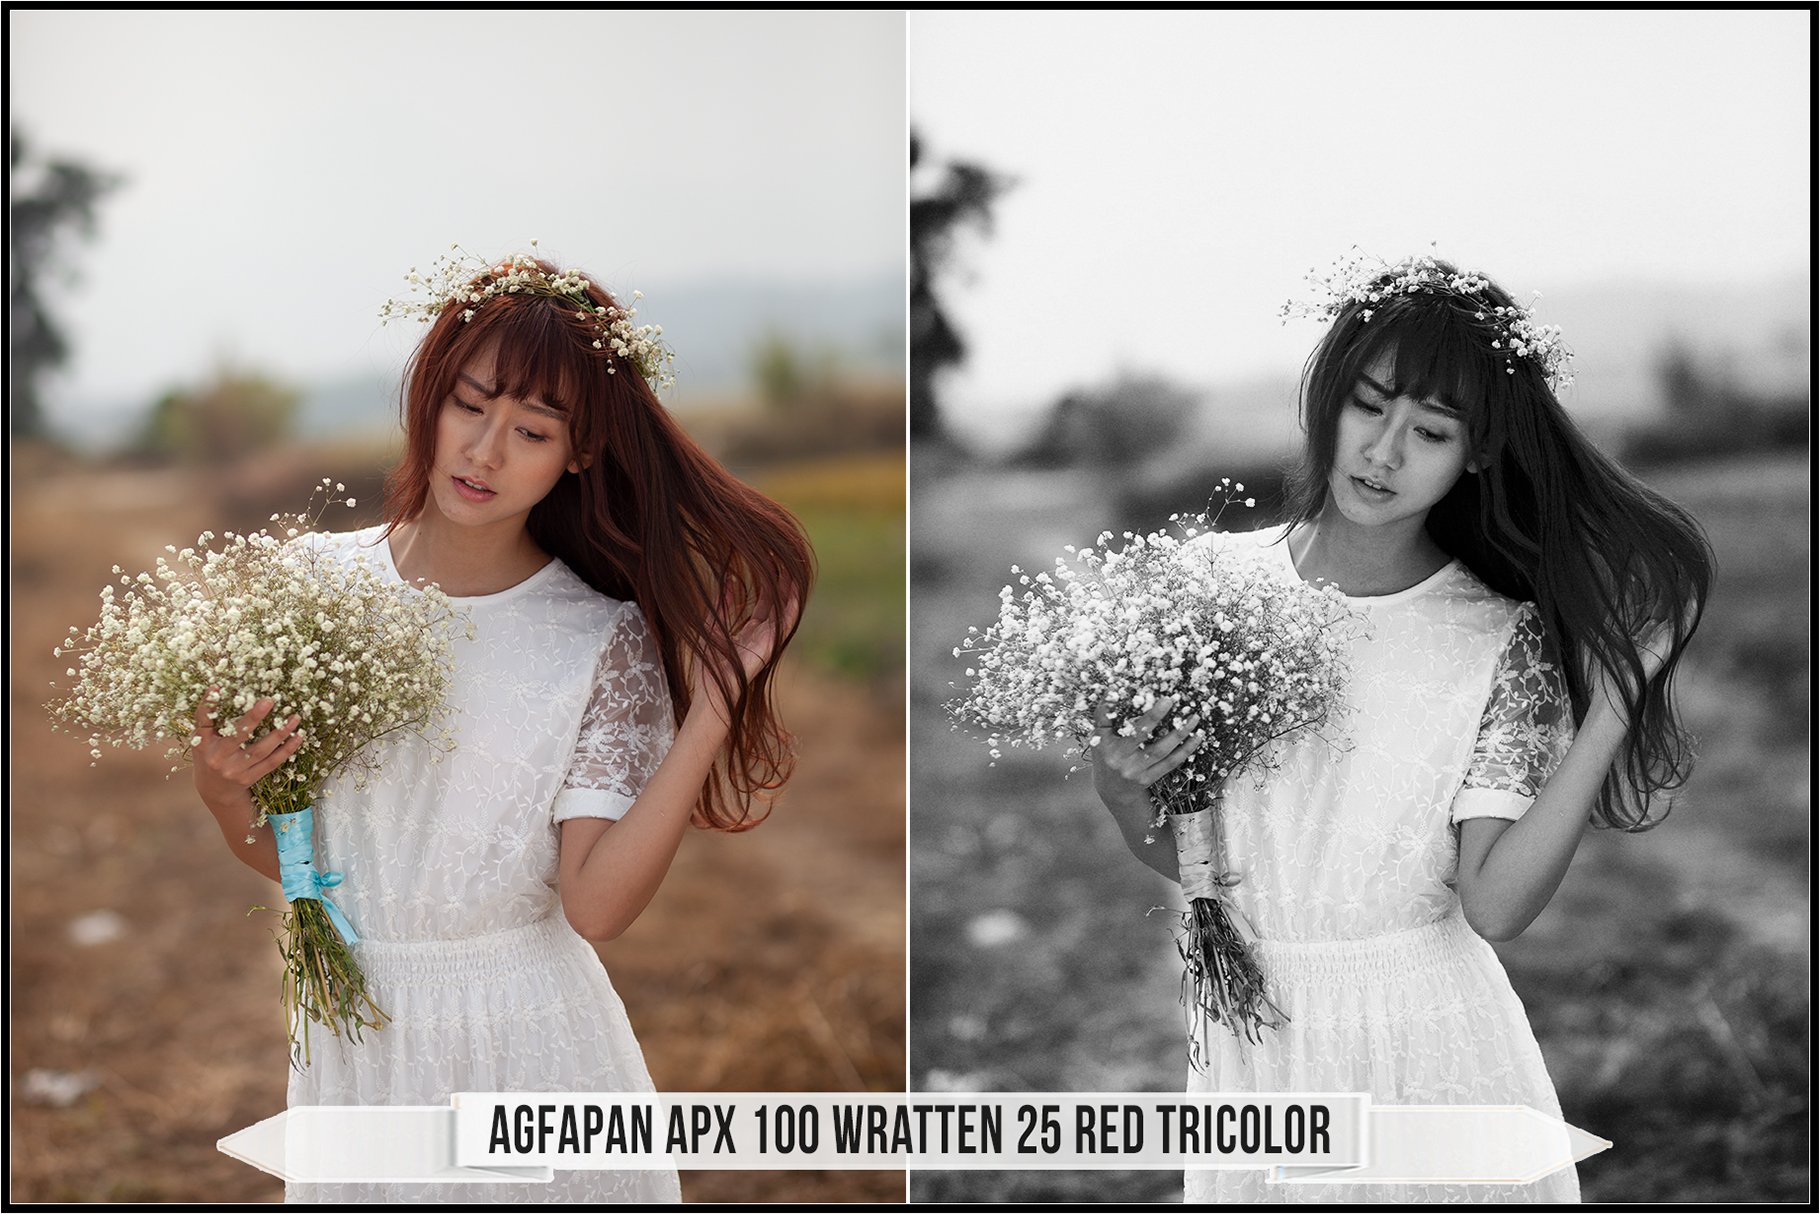 agfapan apx 100 wratten 25 red tricolor copy 272